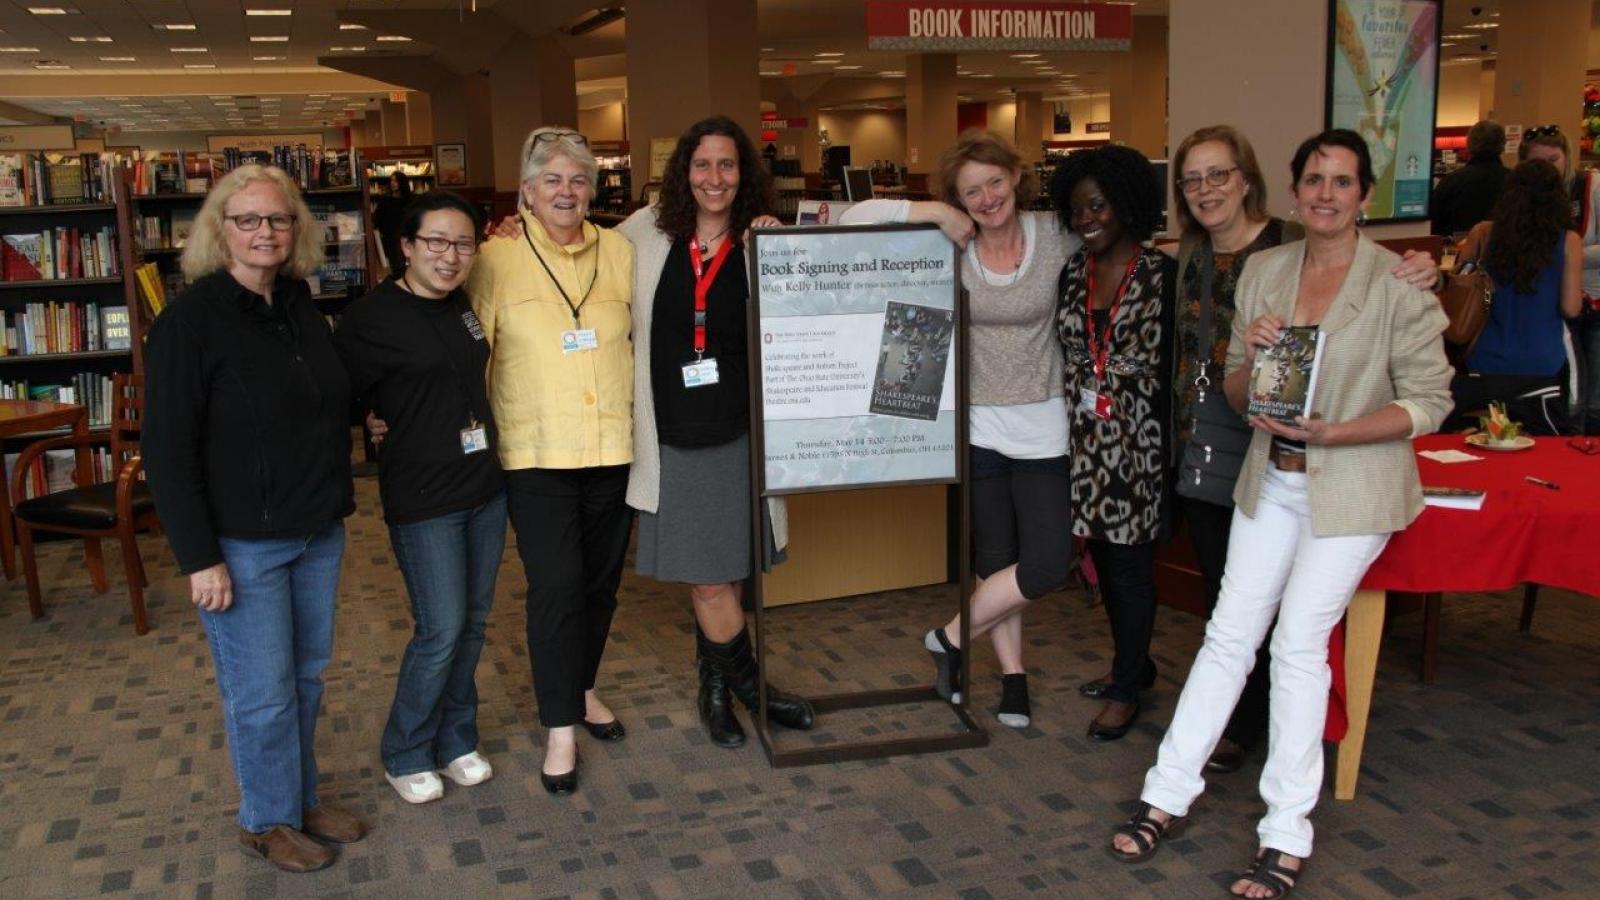 L to R: Betty O’Brien, JiRye Lee, Peggy O’Brien, Robin Post, Kelly Hunter, Debbie Korley, Lesley Ferris, and Maureen Ryan at the book signing for Shakespeare’s Heartbeat. 